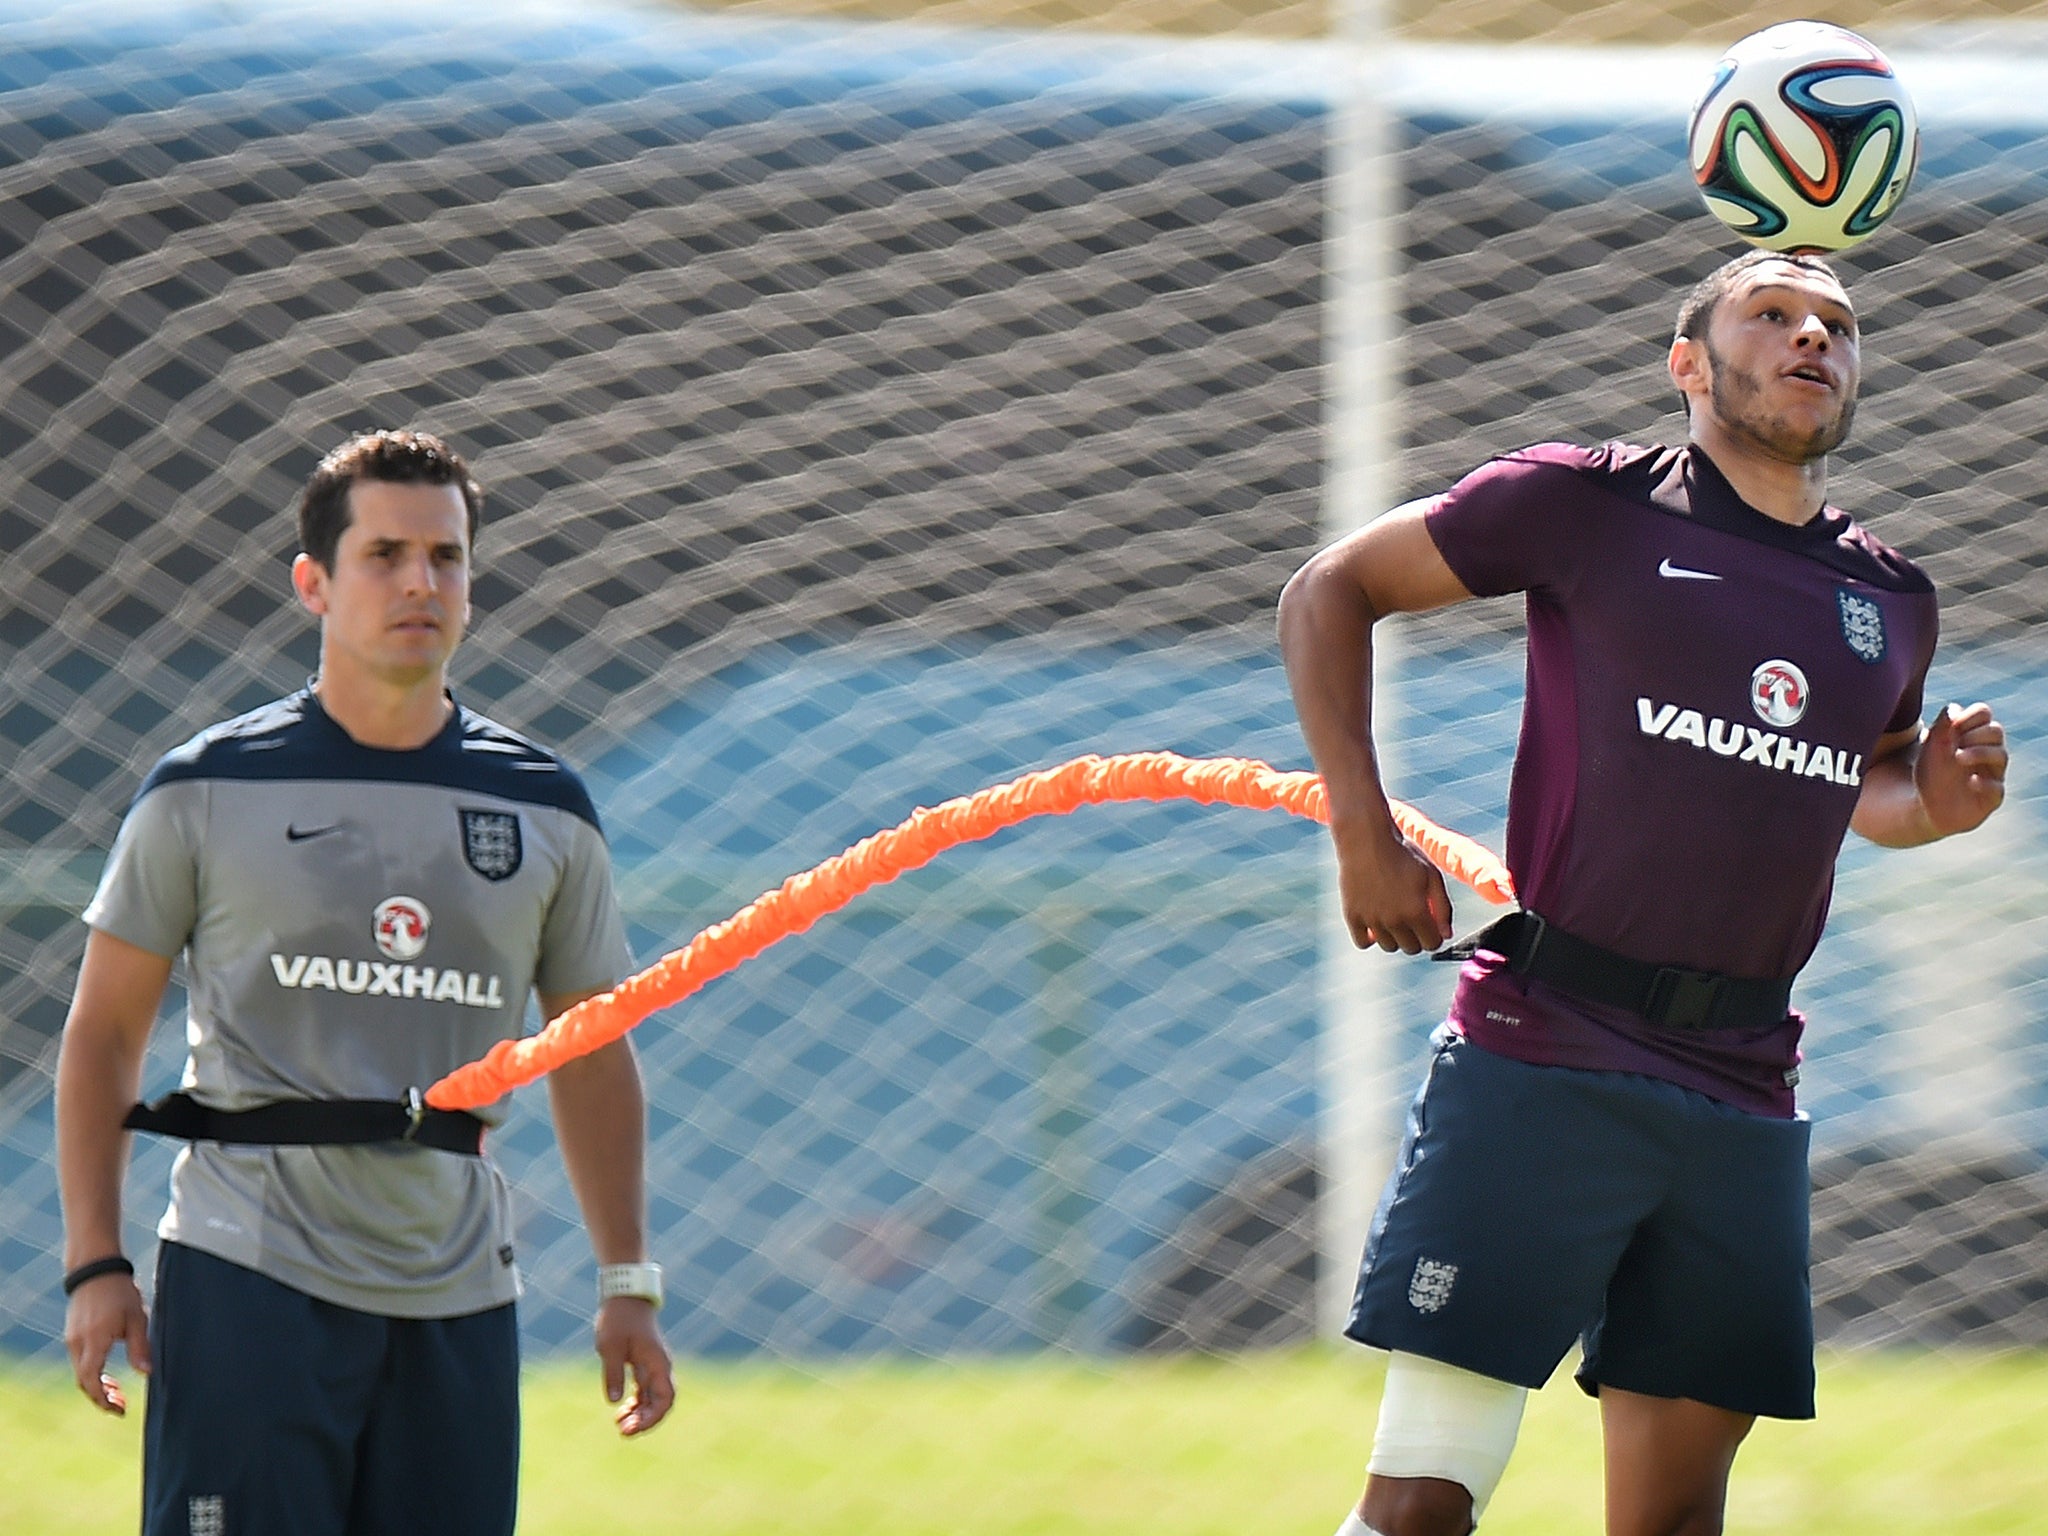 Alex Oxlade-Chamberlain trains with the England team